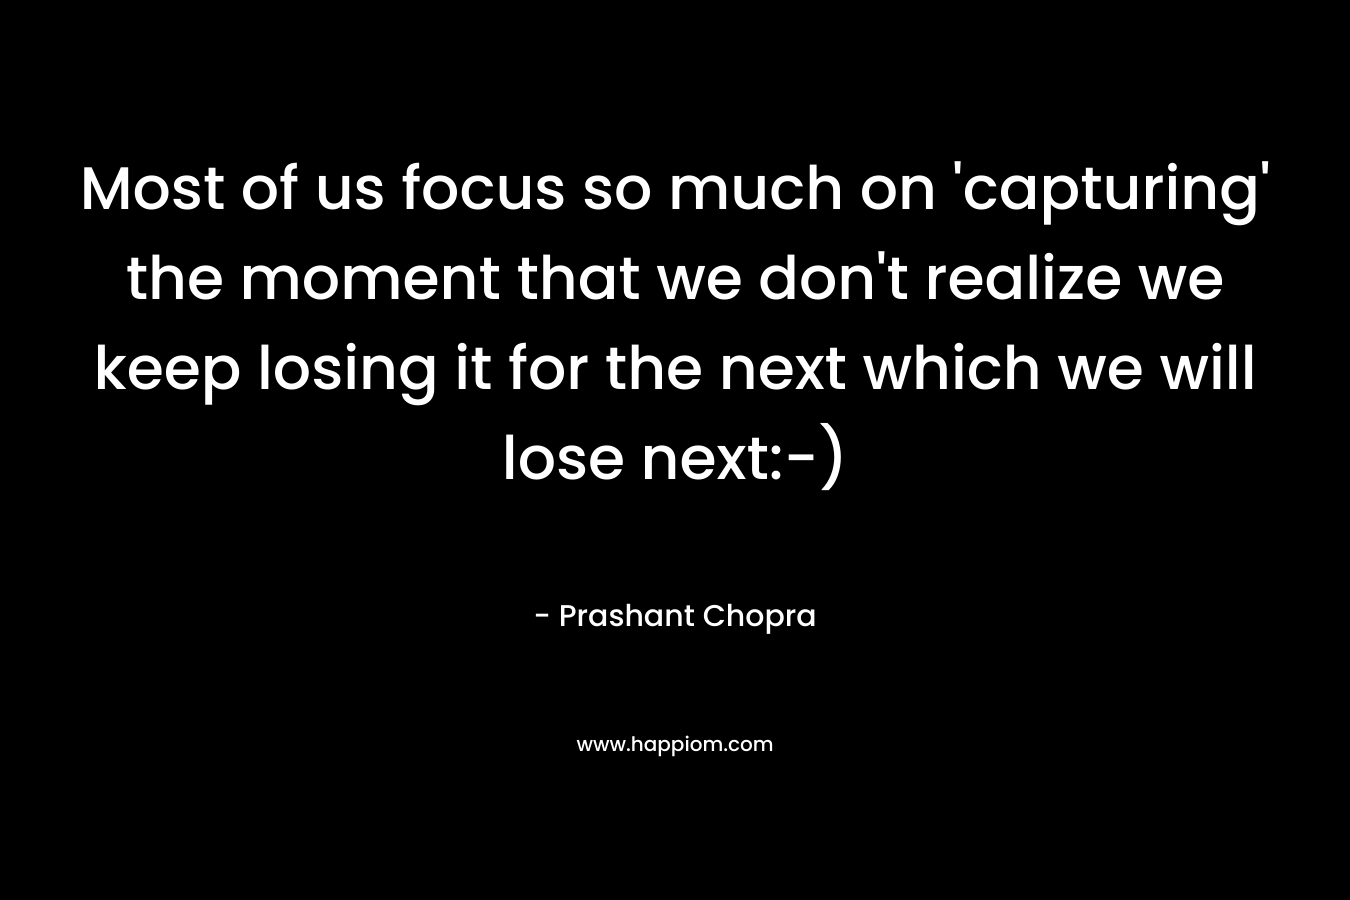 Most of us focus so much on 'capturing' the moment that we don't realize we keep losing it for the next which we will lose next:-)